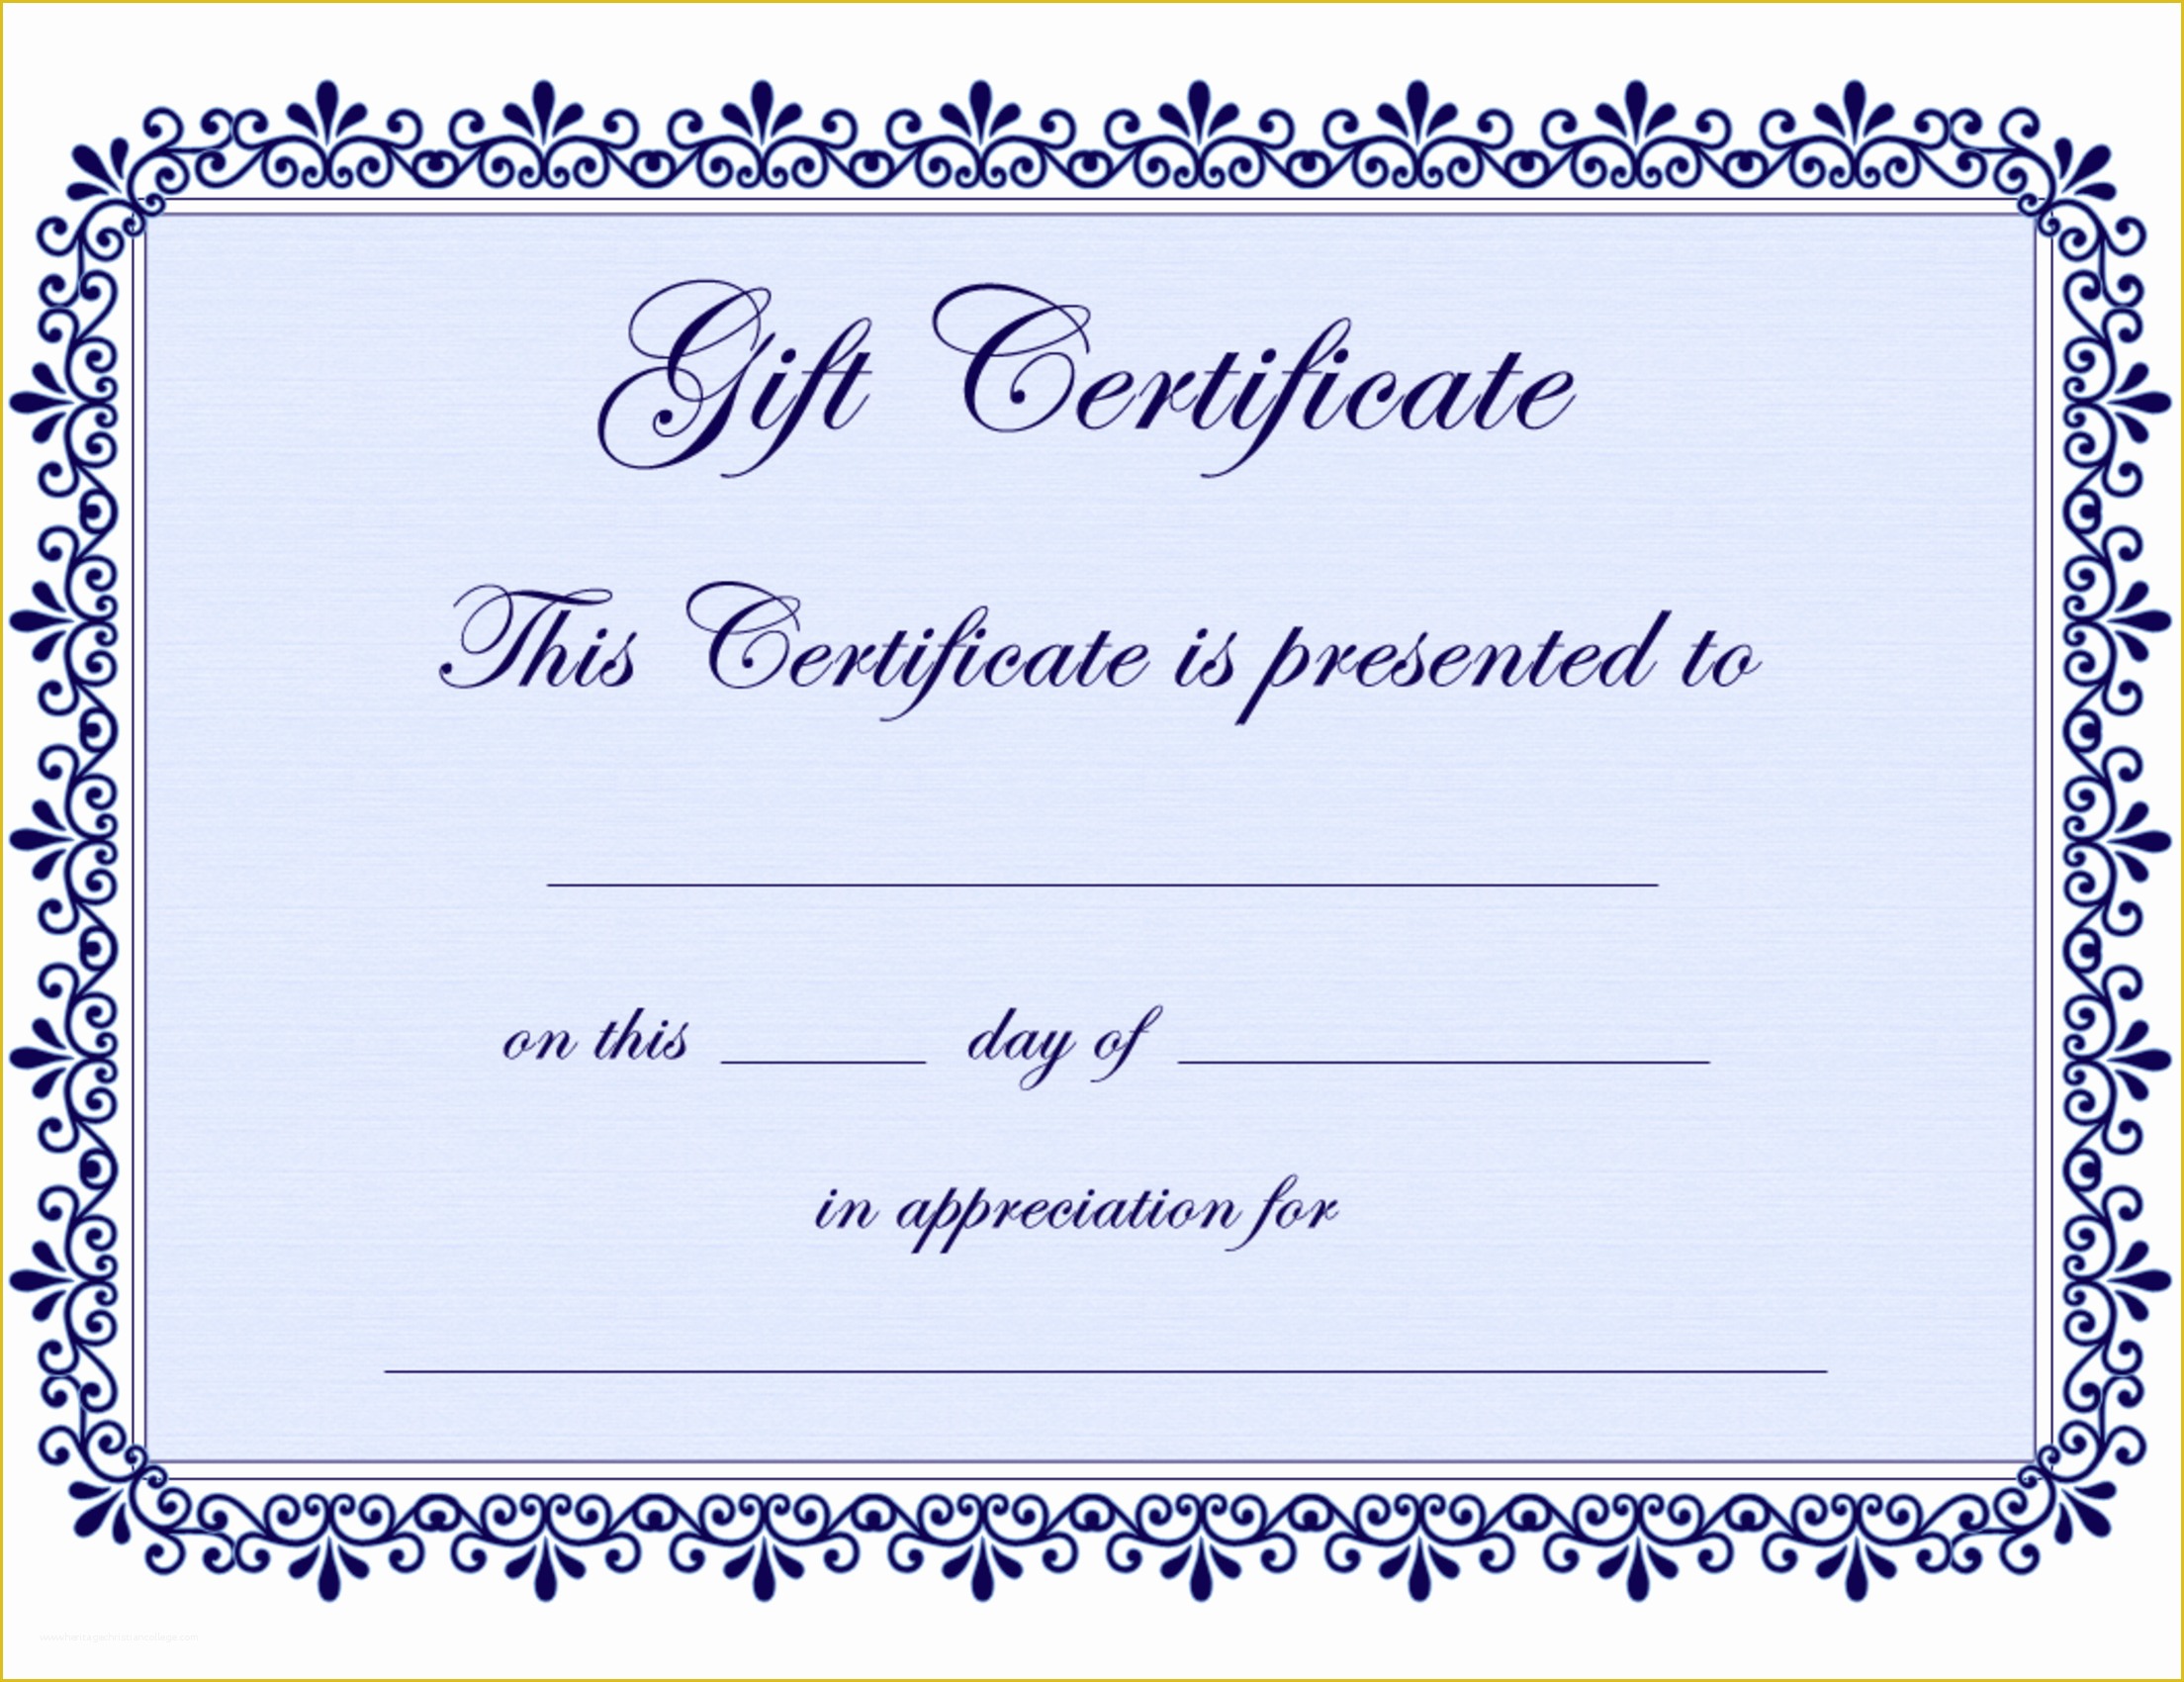 Gift Certificate Template Free Of Certificate Templates